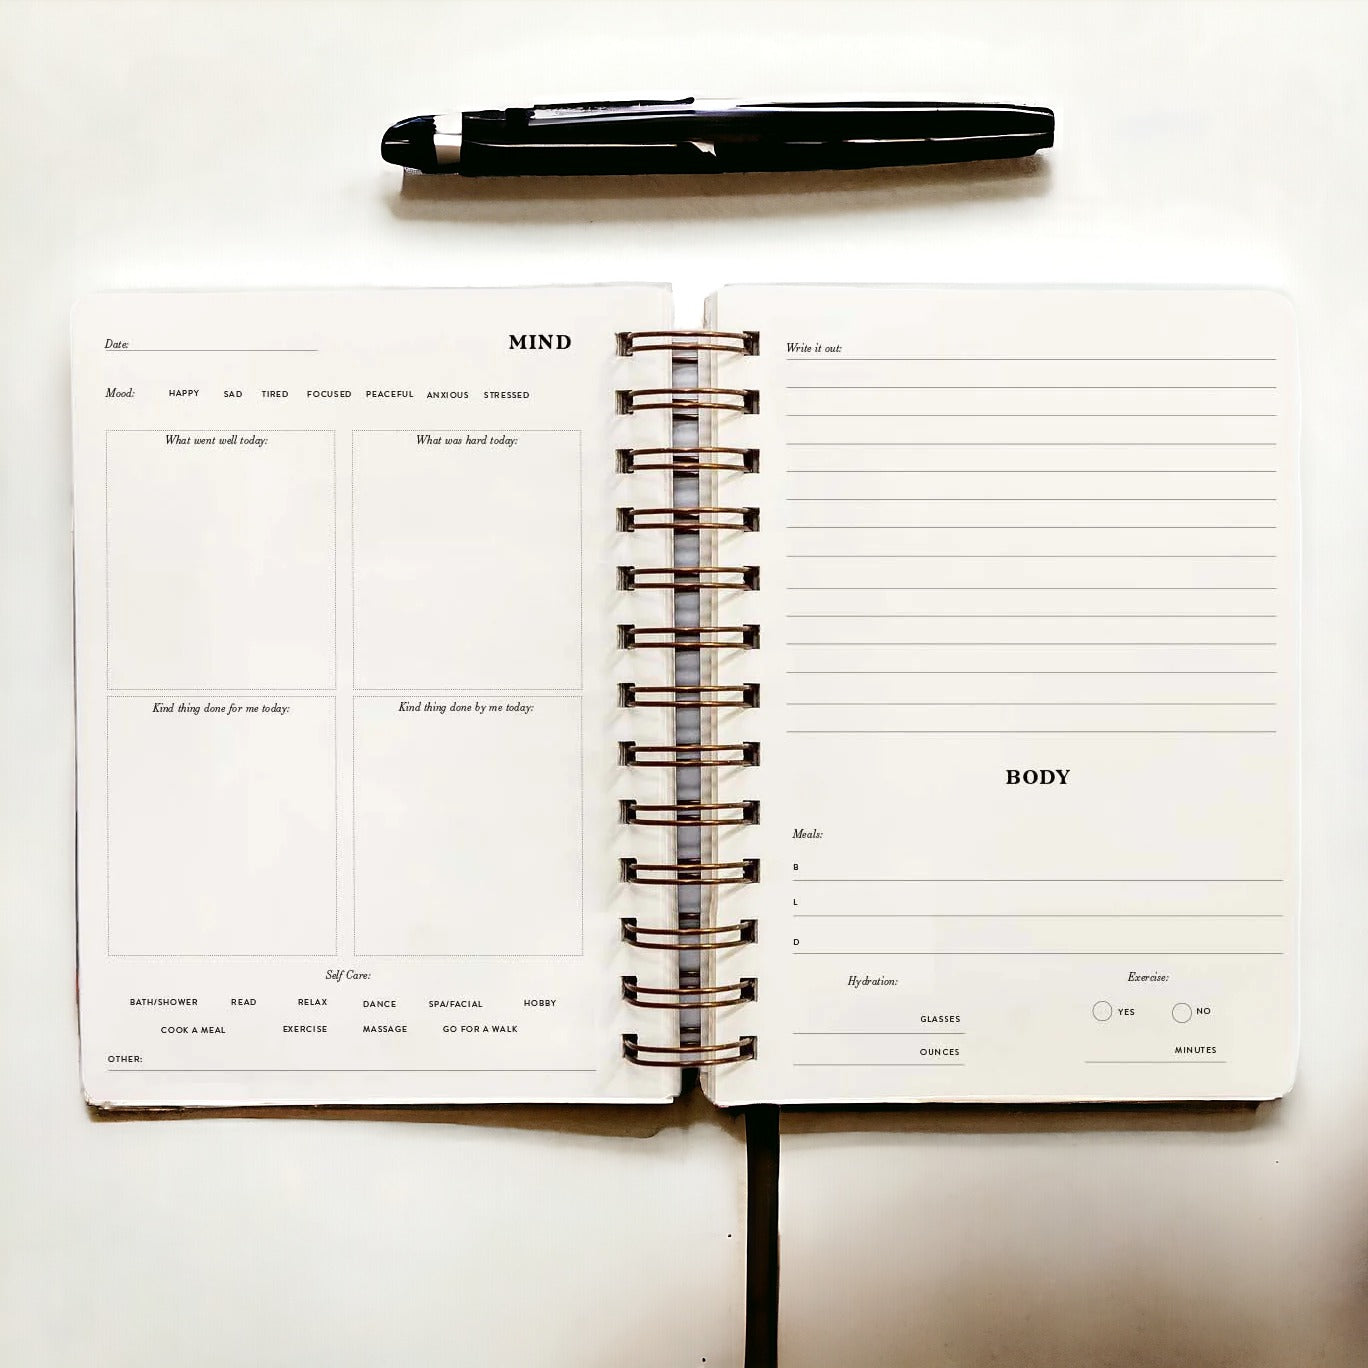 The Wellness Journal open on a desk with a pen